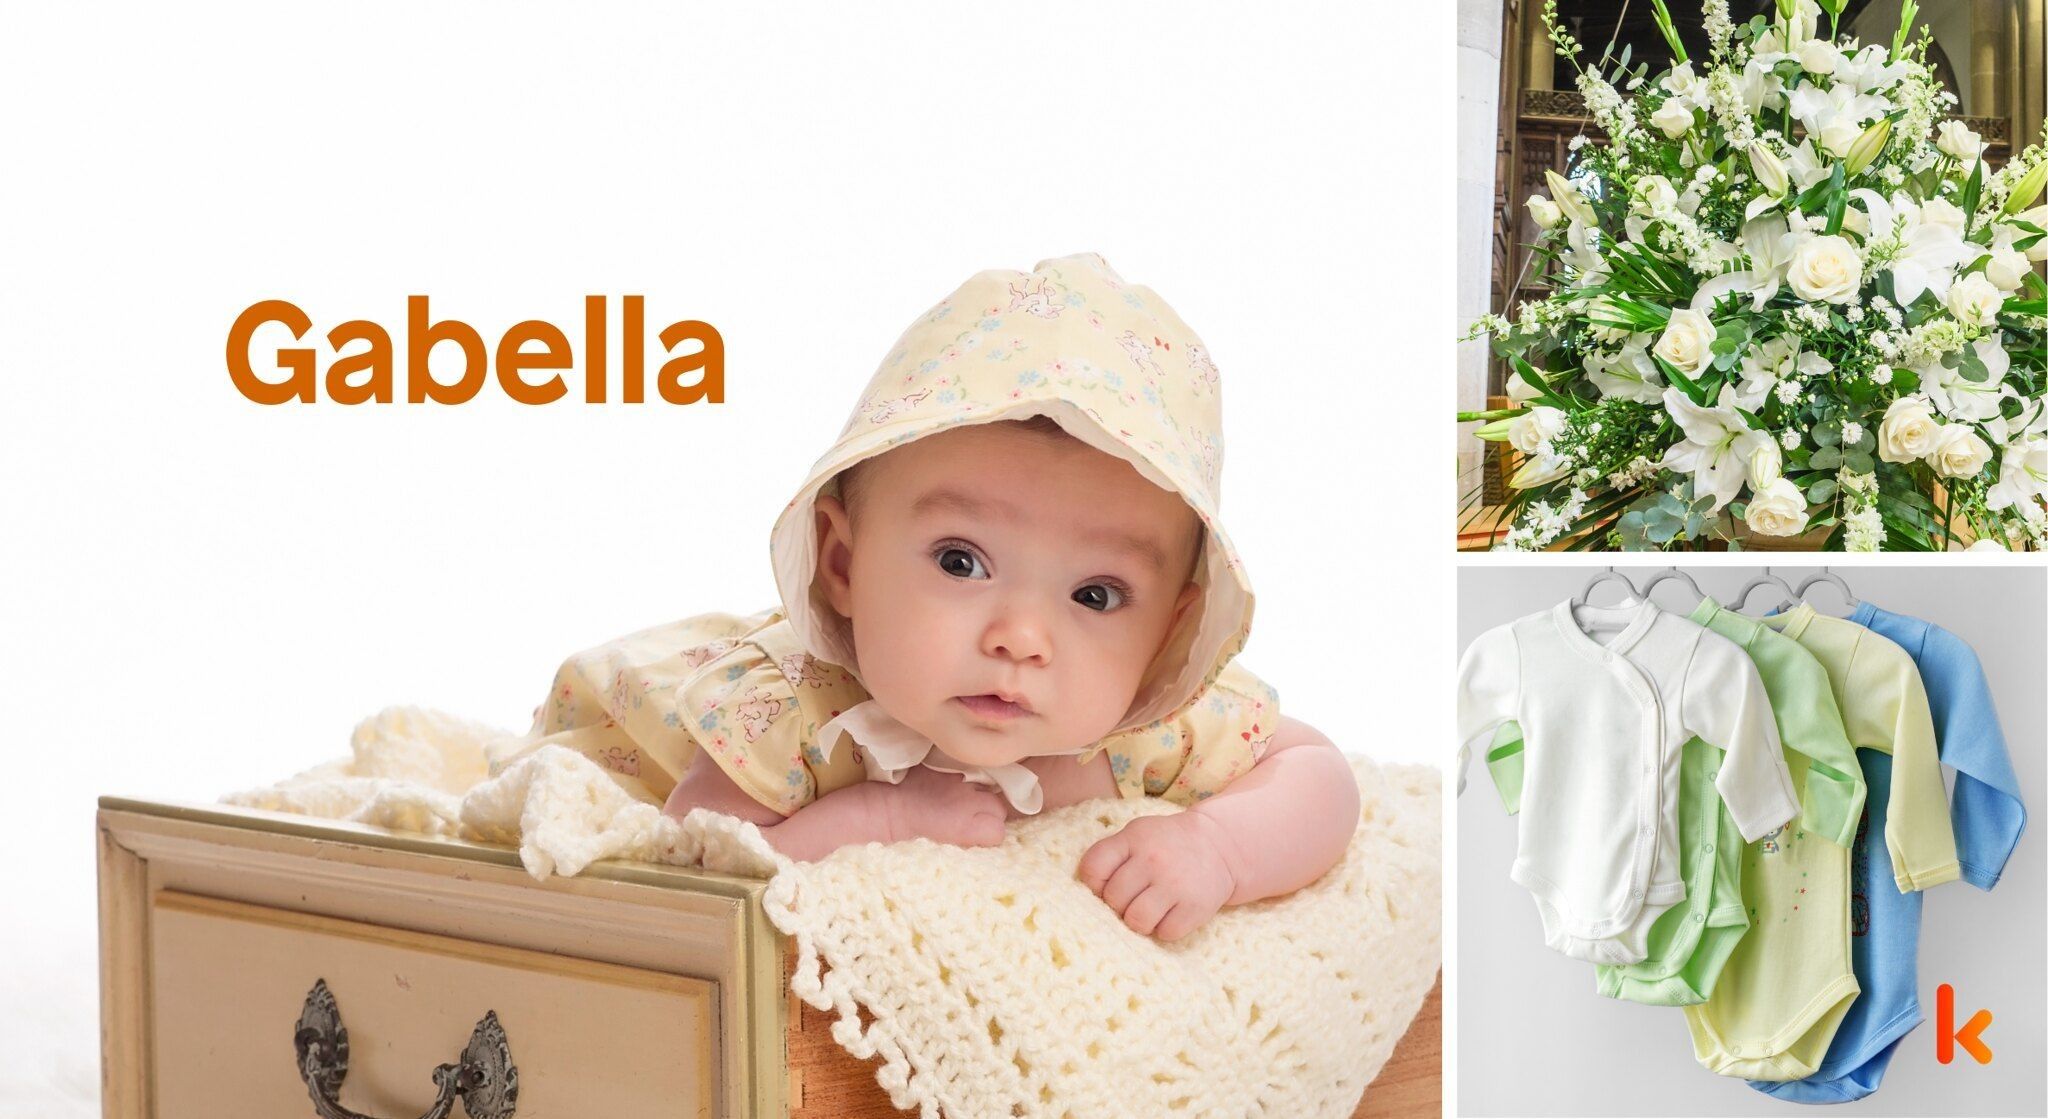 Meaning of the name Gabella